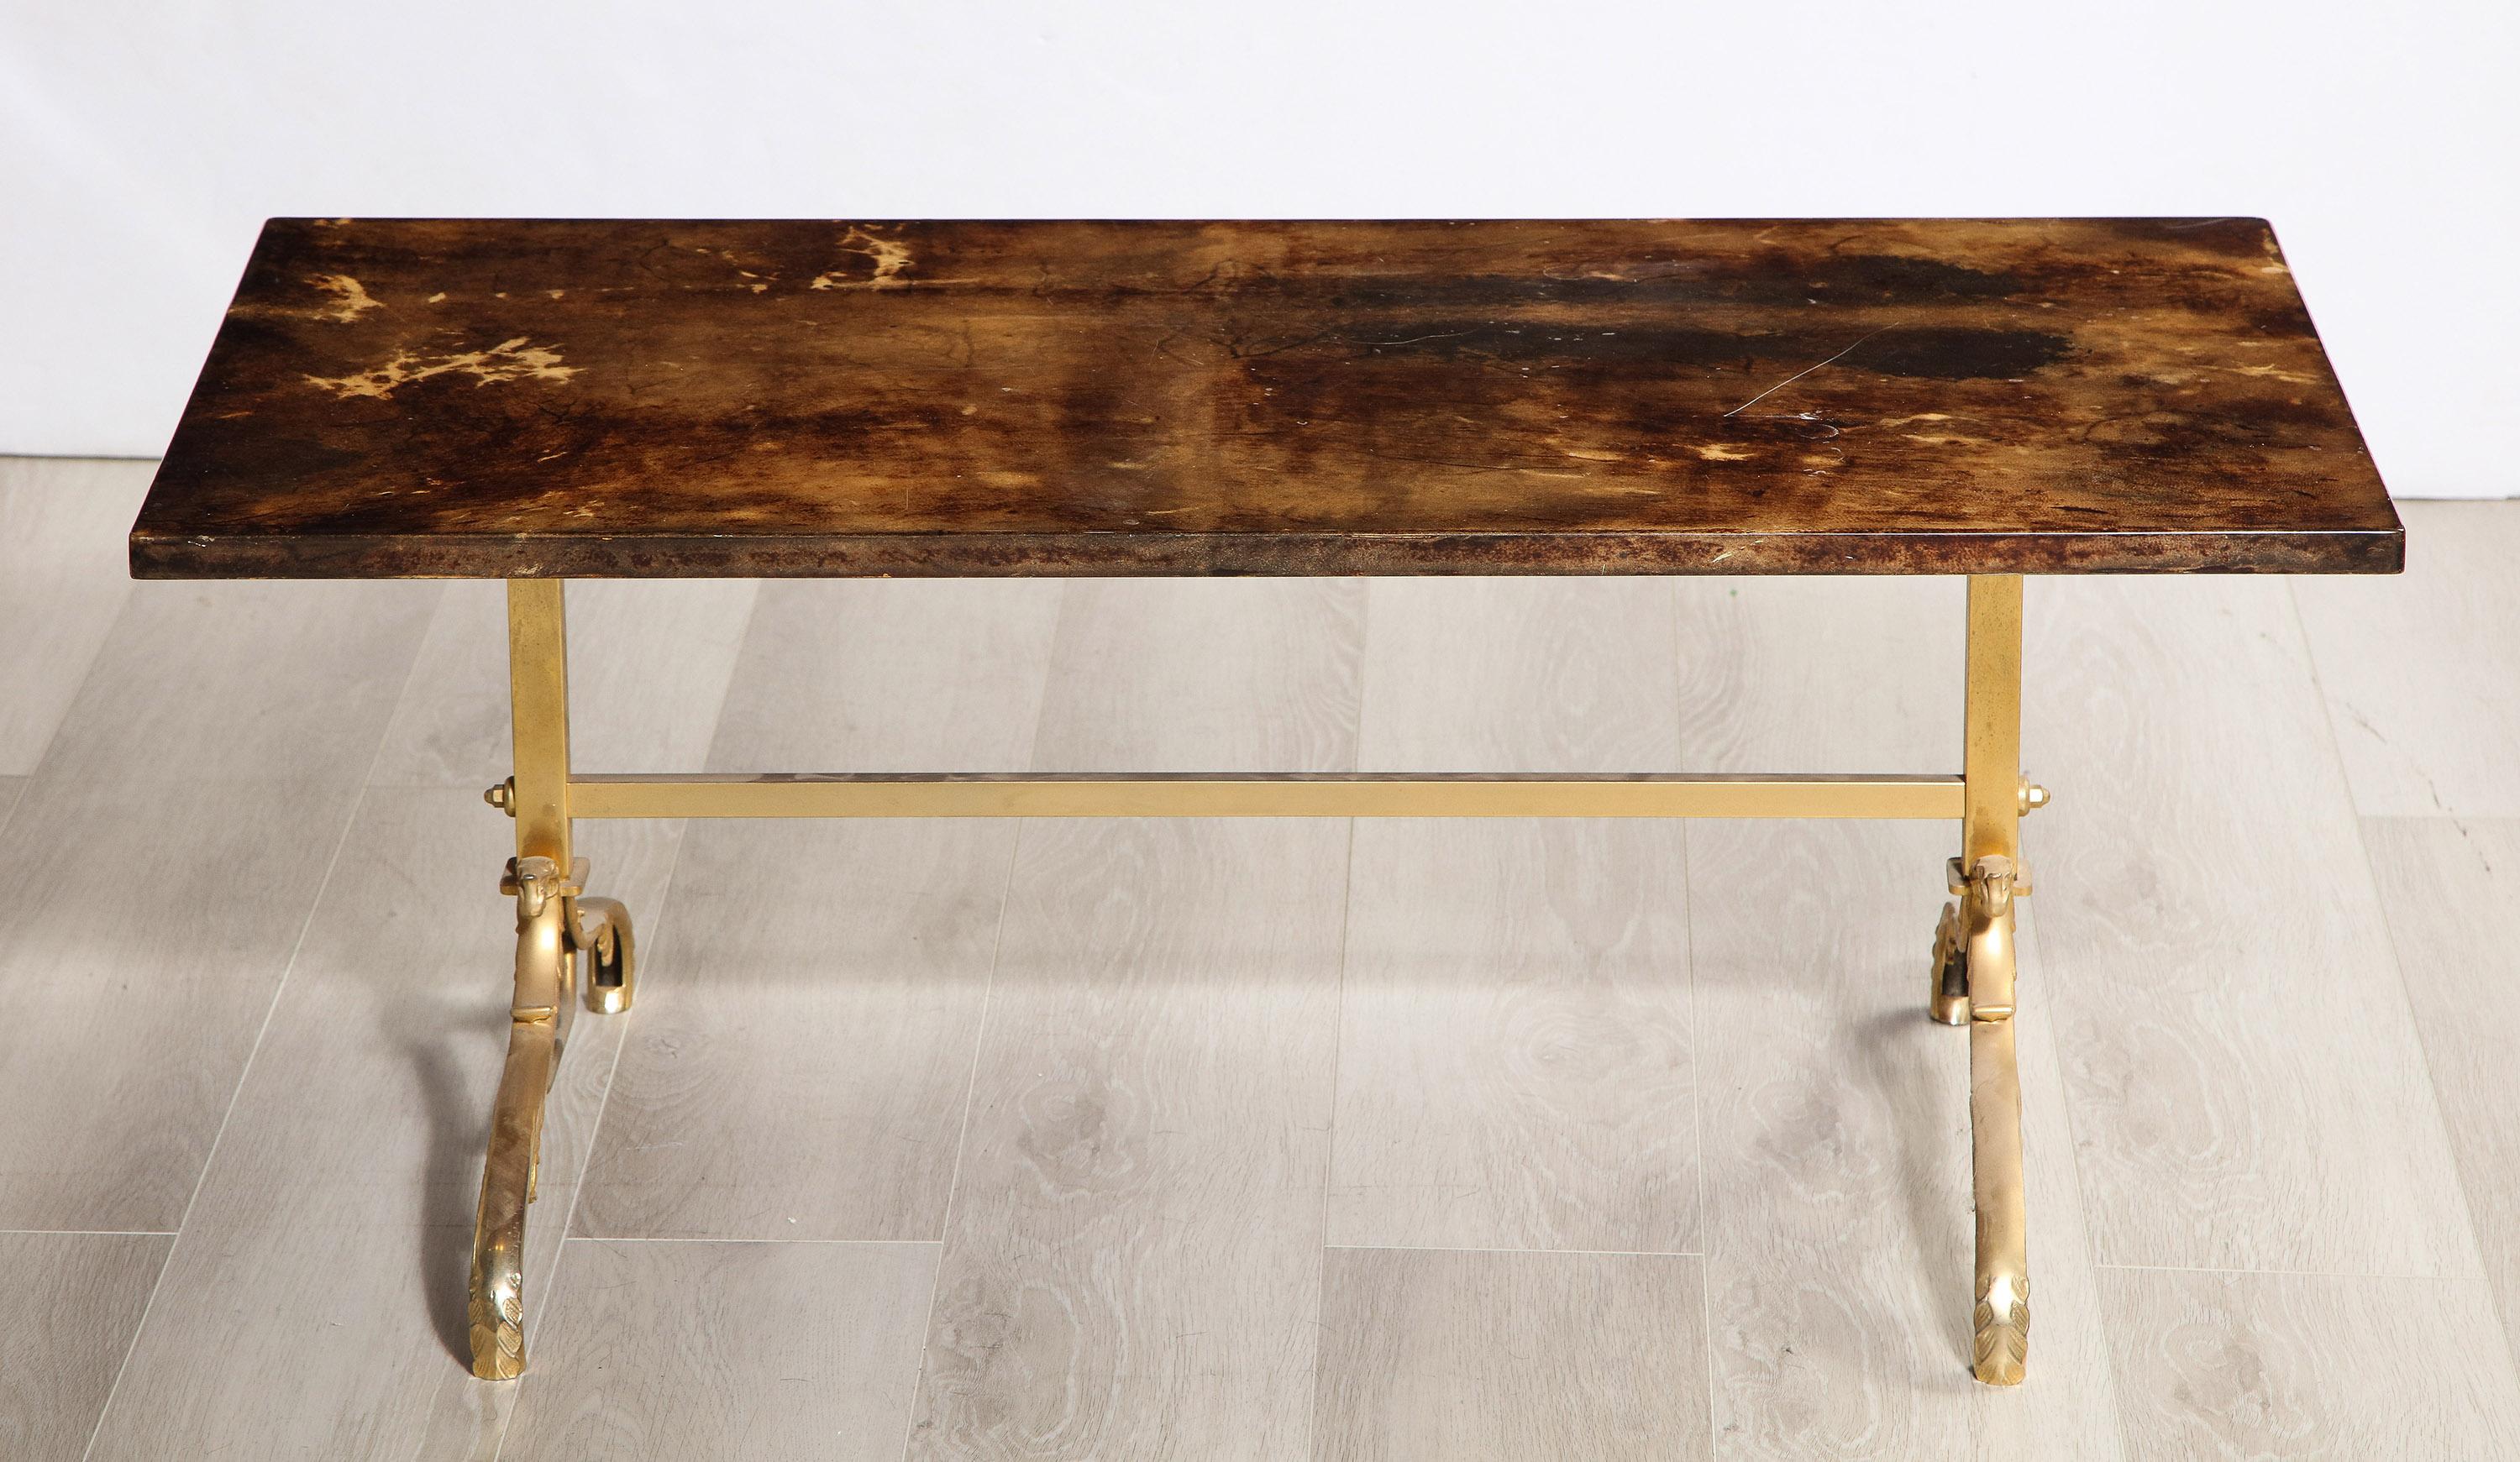 The parchment wrapped top sealed with shellac and supported by an intricate brass base.
The table is marked with a manufacturer's label on the bottom of the table.